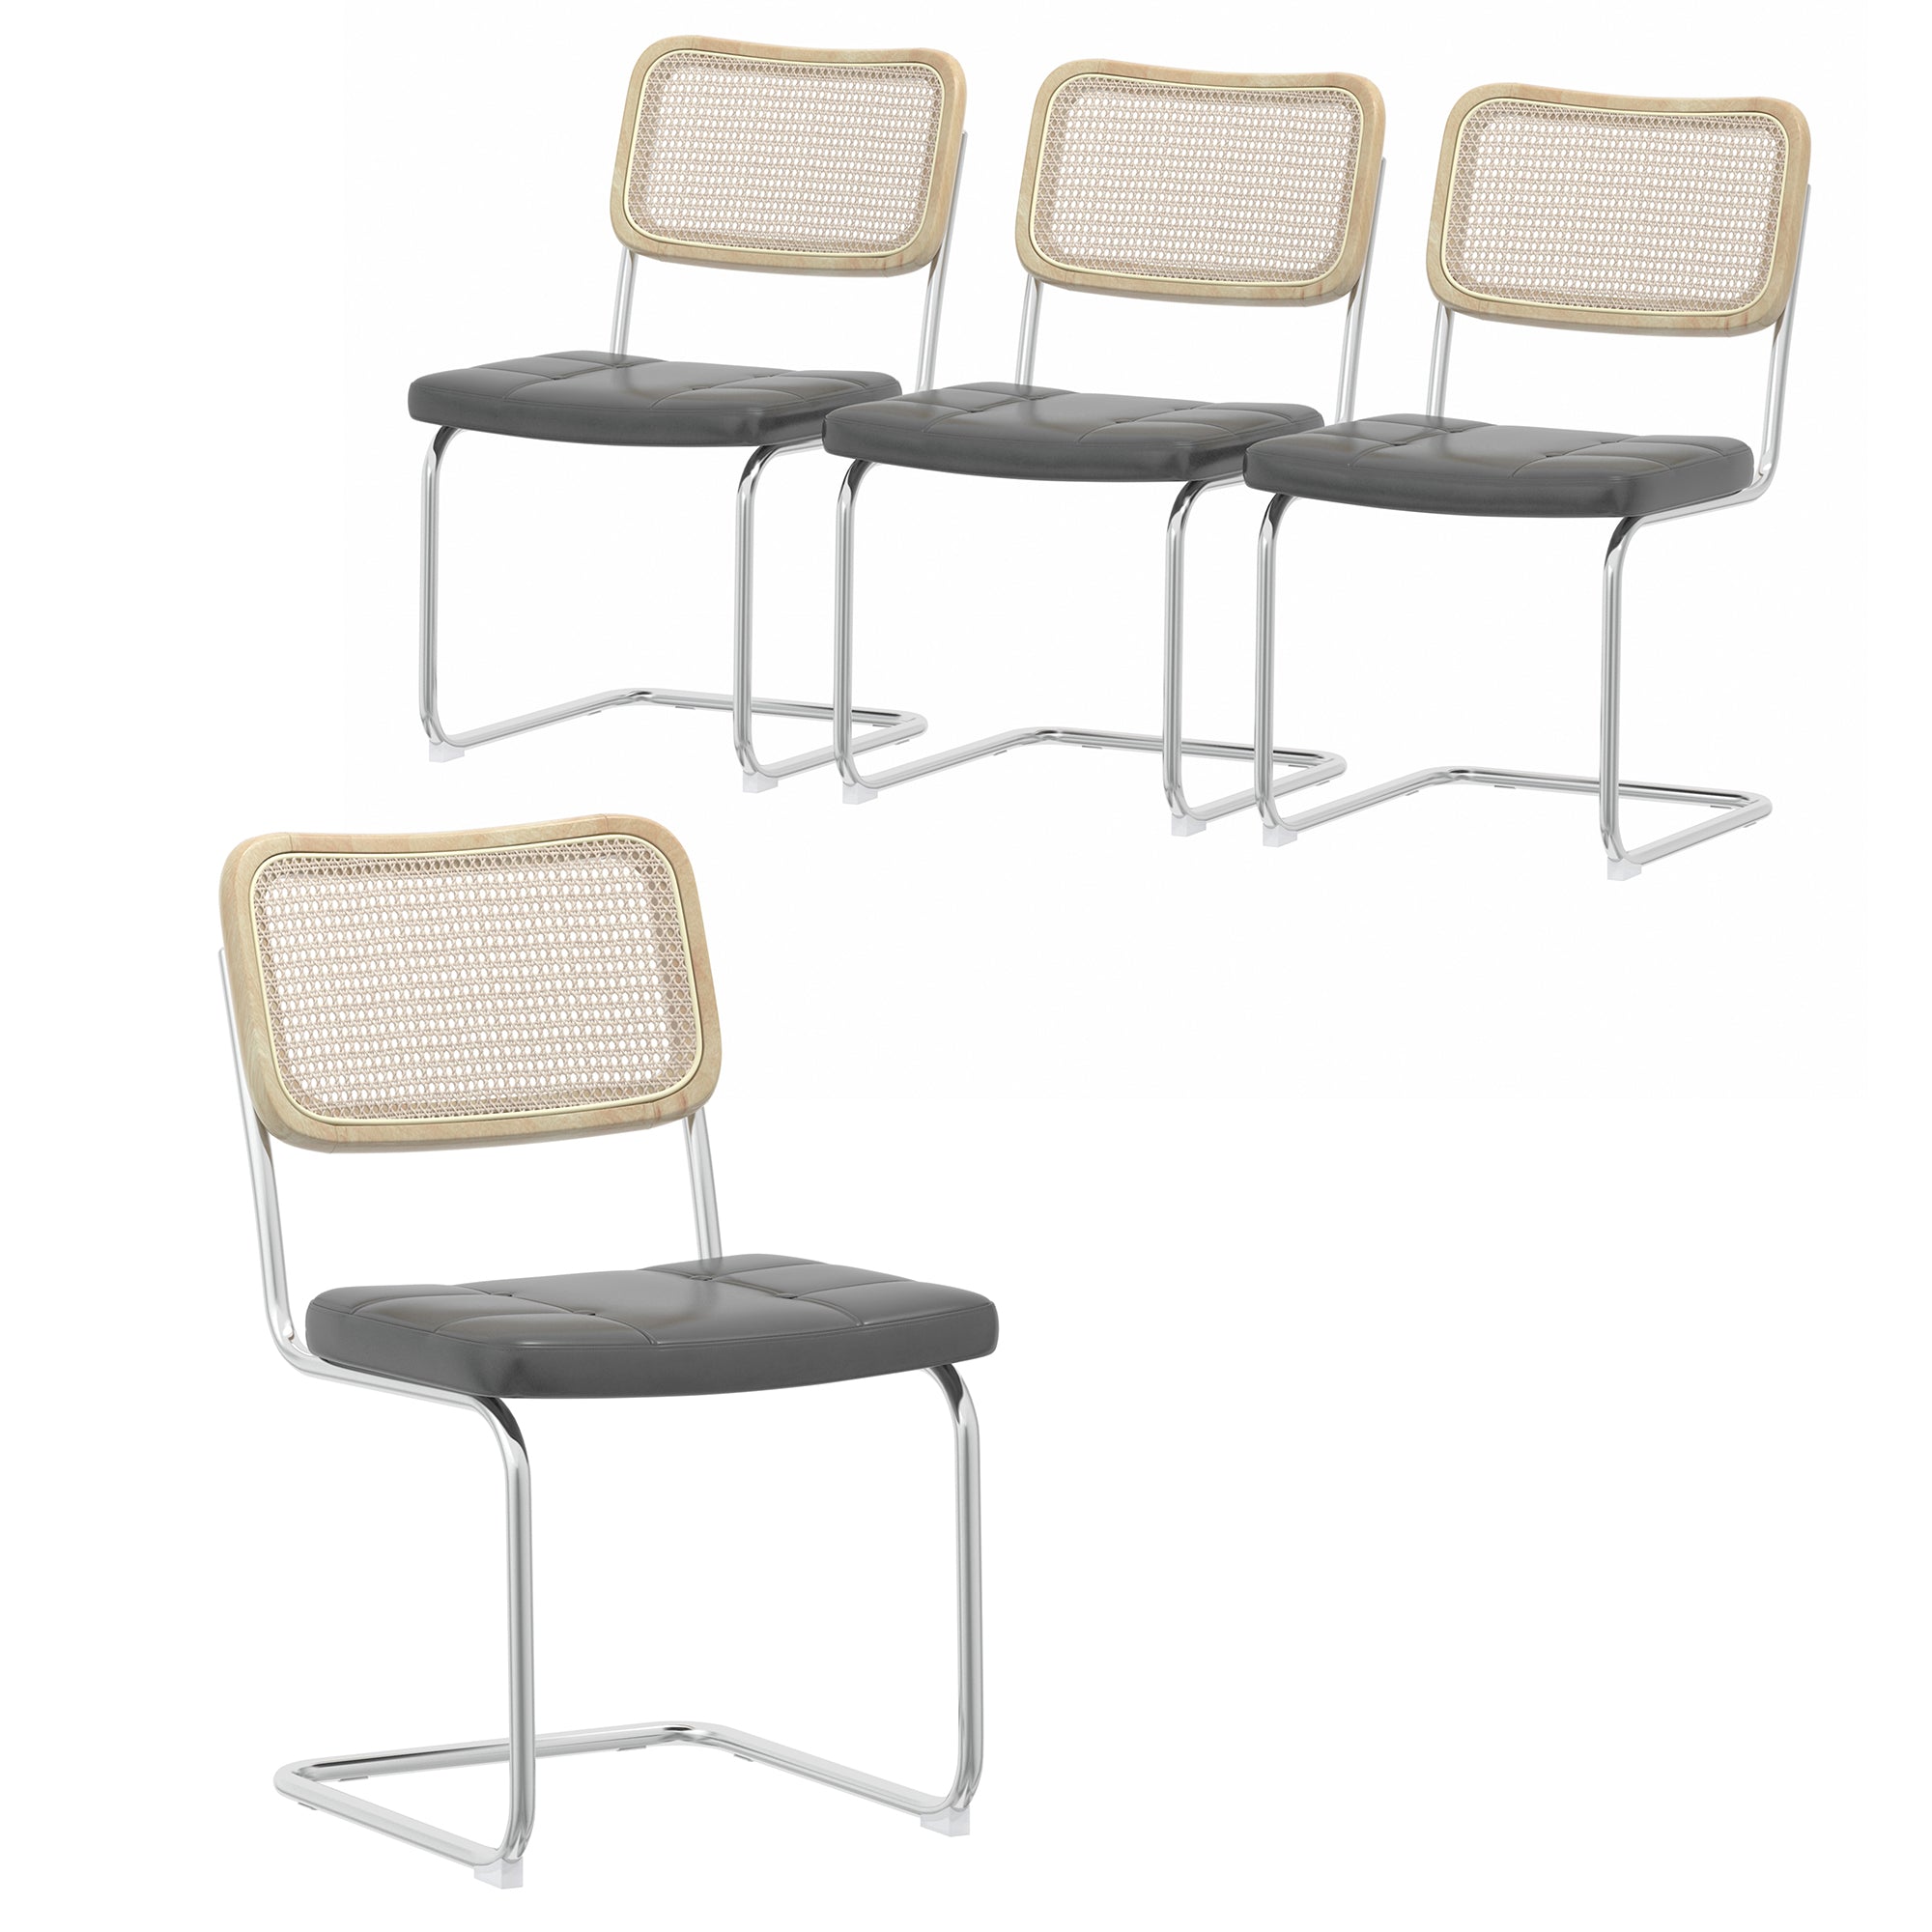 ZNTS Set of 4, Leather Dining Chair with High-Density Sponge, Rattan Chair for Dining room, Living room, W24167822